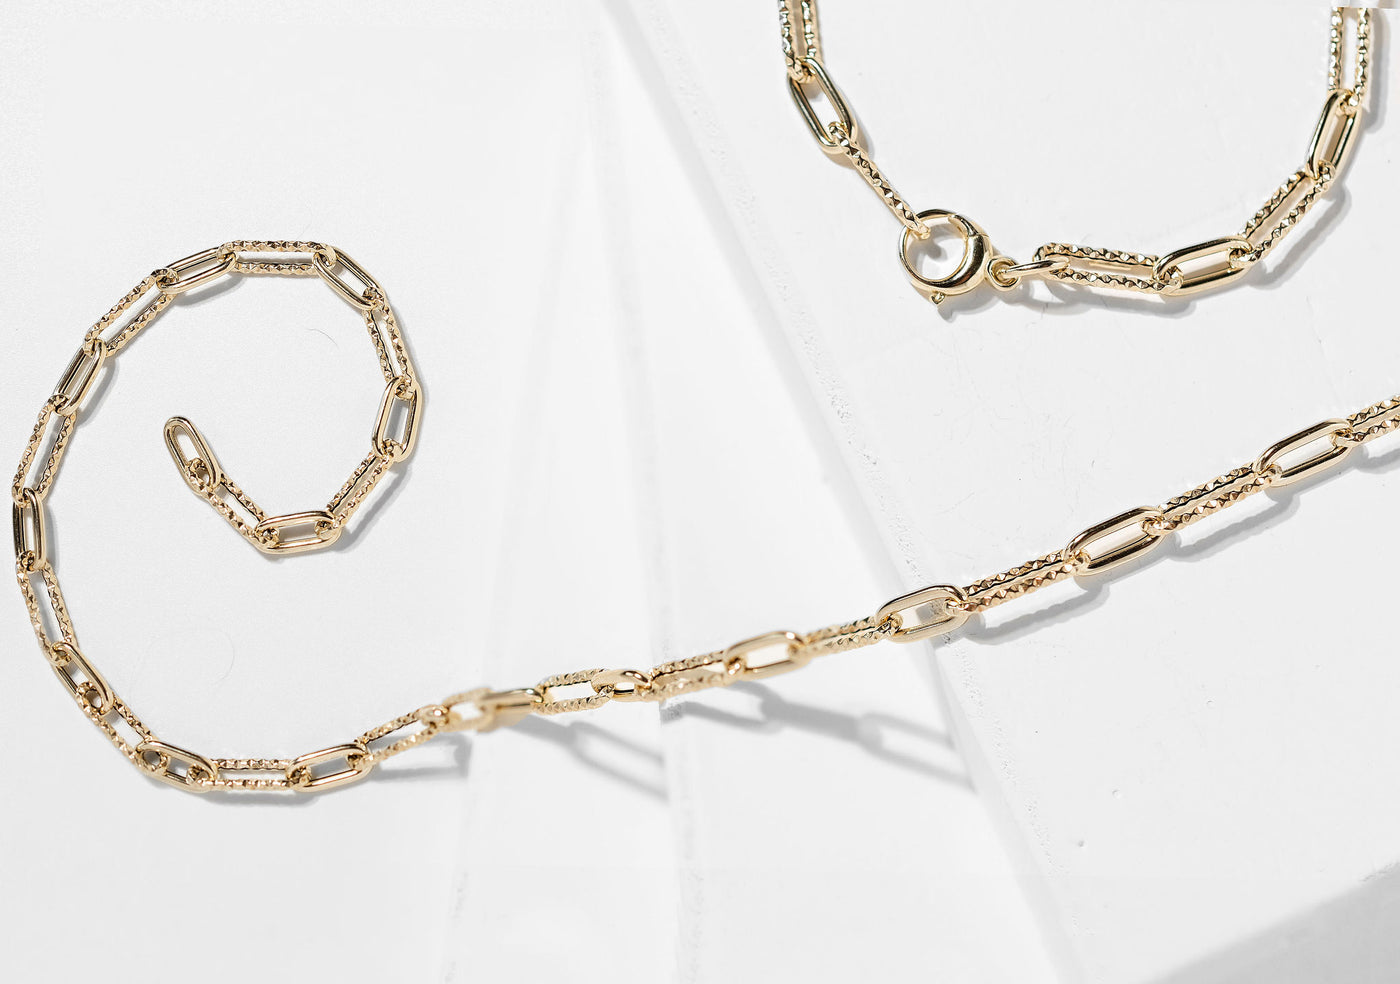 Diamond Cut Paperclip Necklace - 14k Yellow Gold